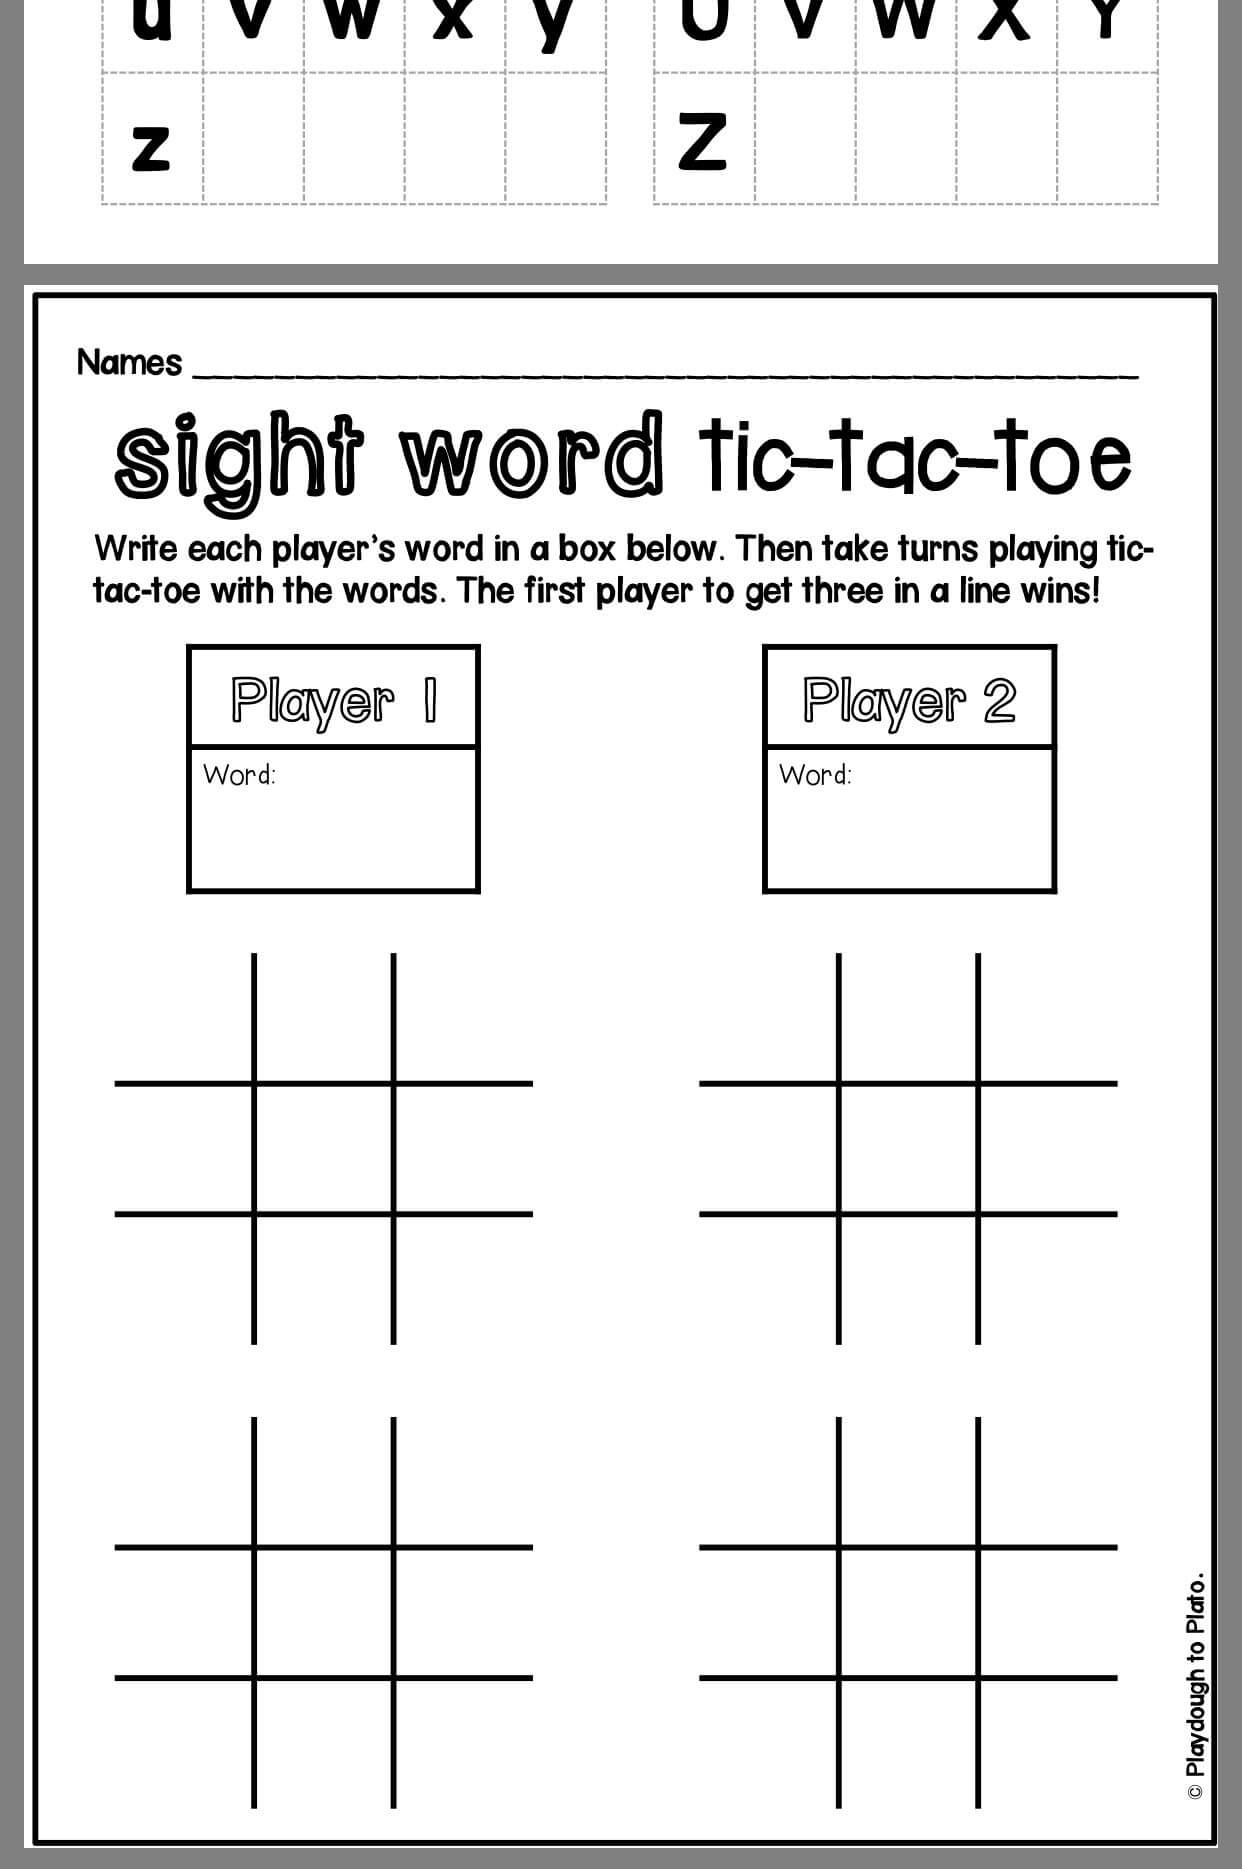 Pin On Sight Words In Tic Tac Toe Template Word